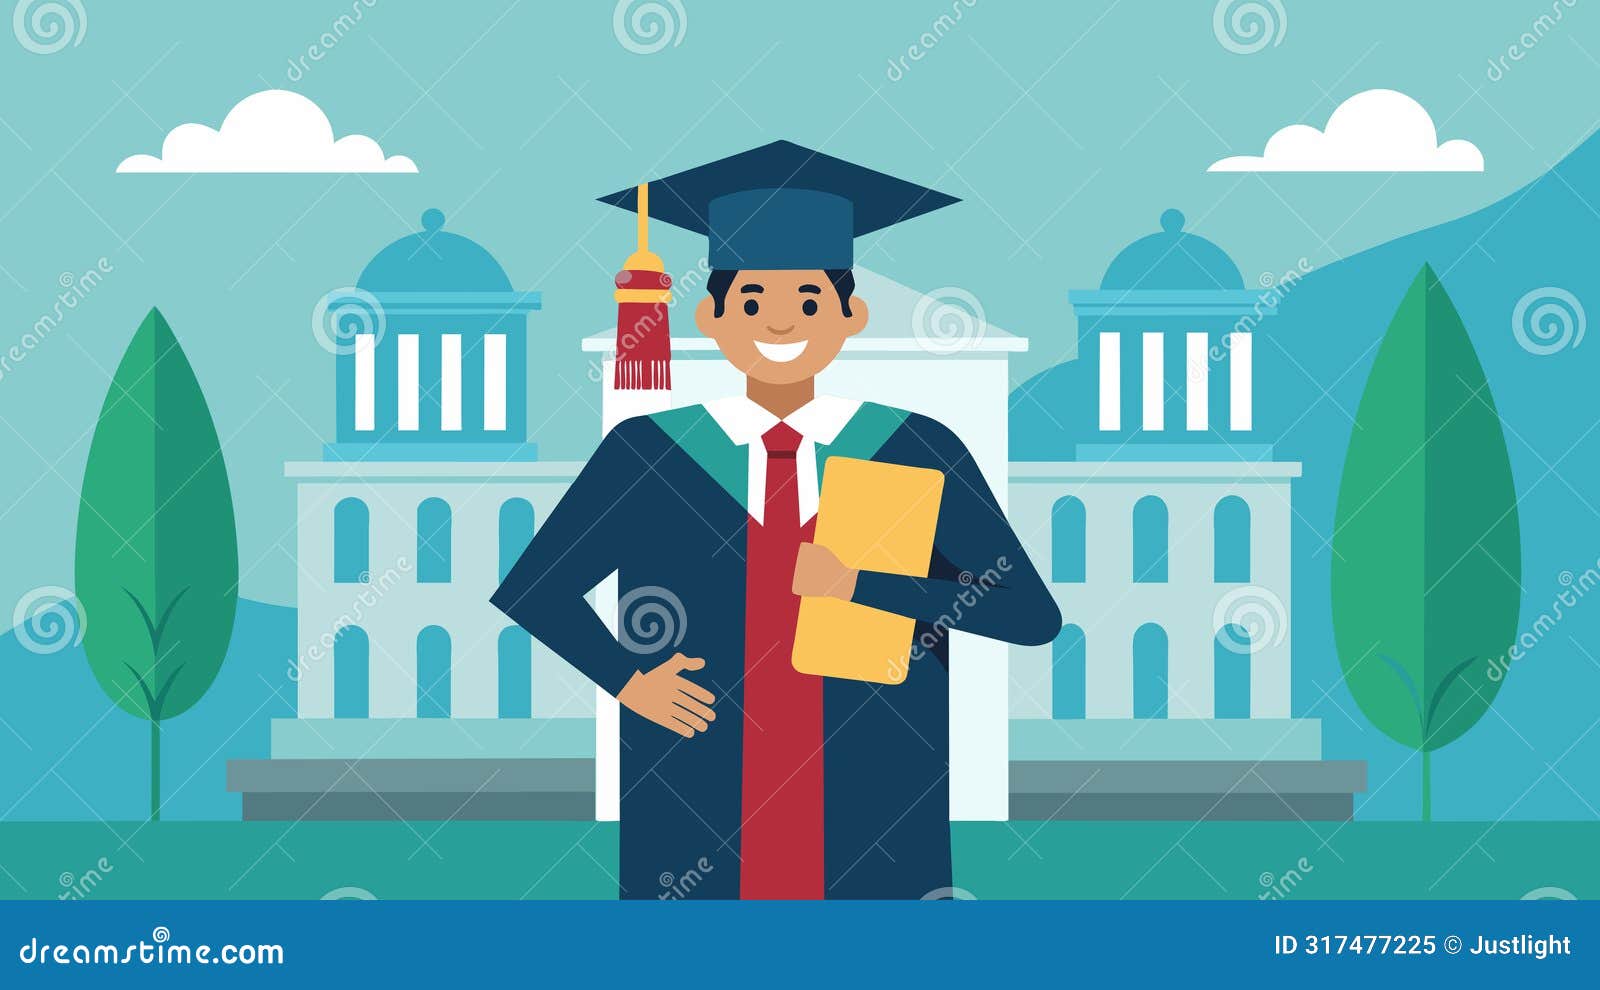 a recent college graduate shares their success story of attending a prestigious university thanks to their participation